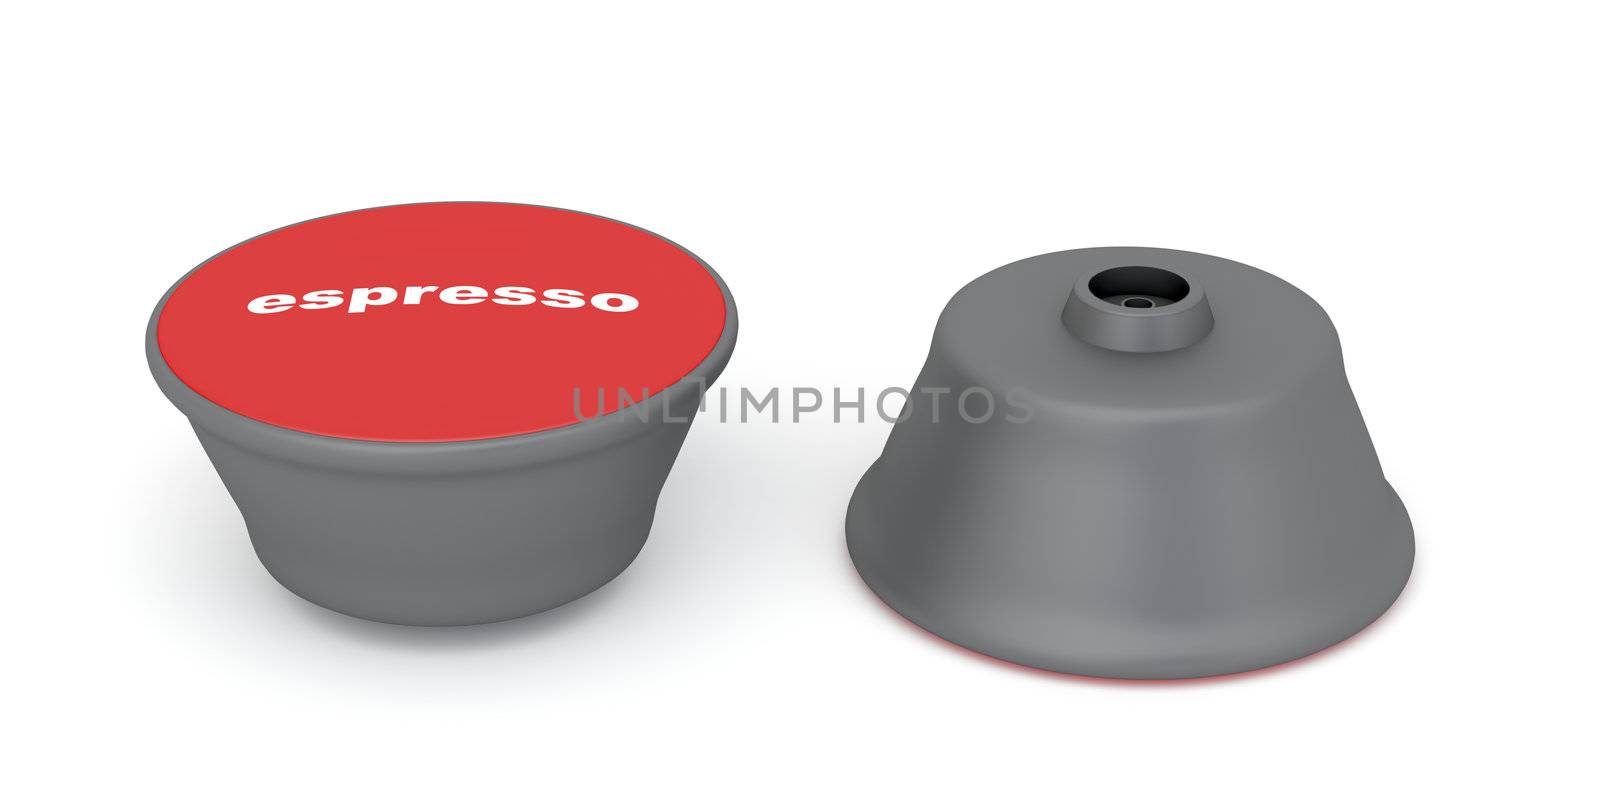 Espresso capsules by magraphics